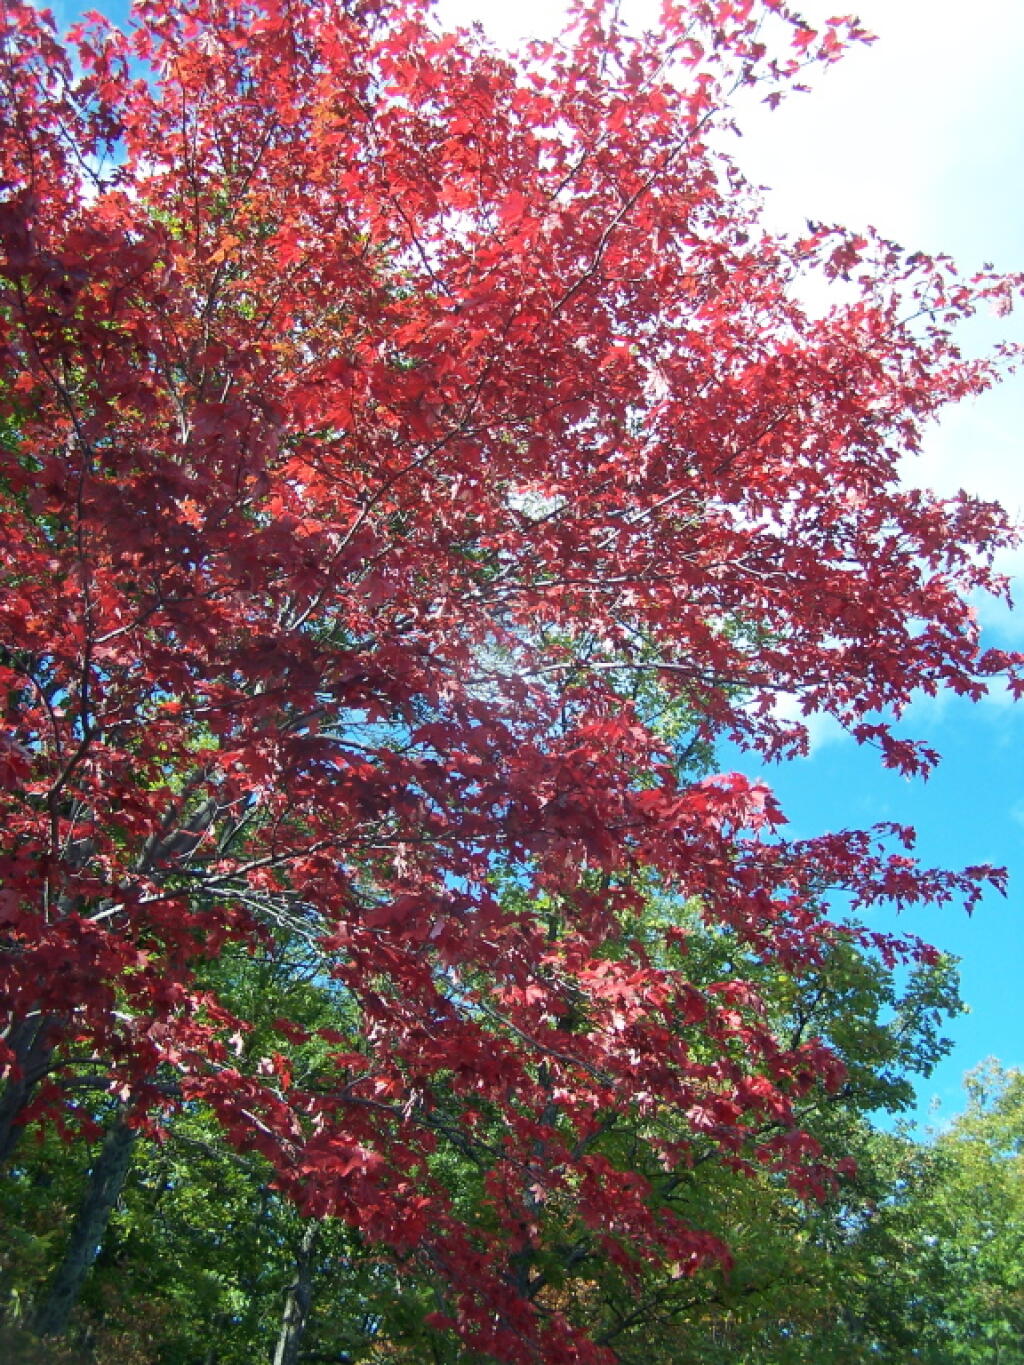 Another Bright Red Maple